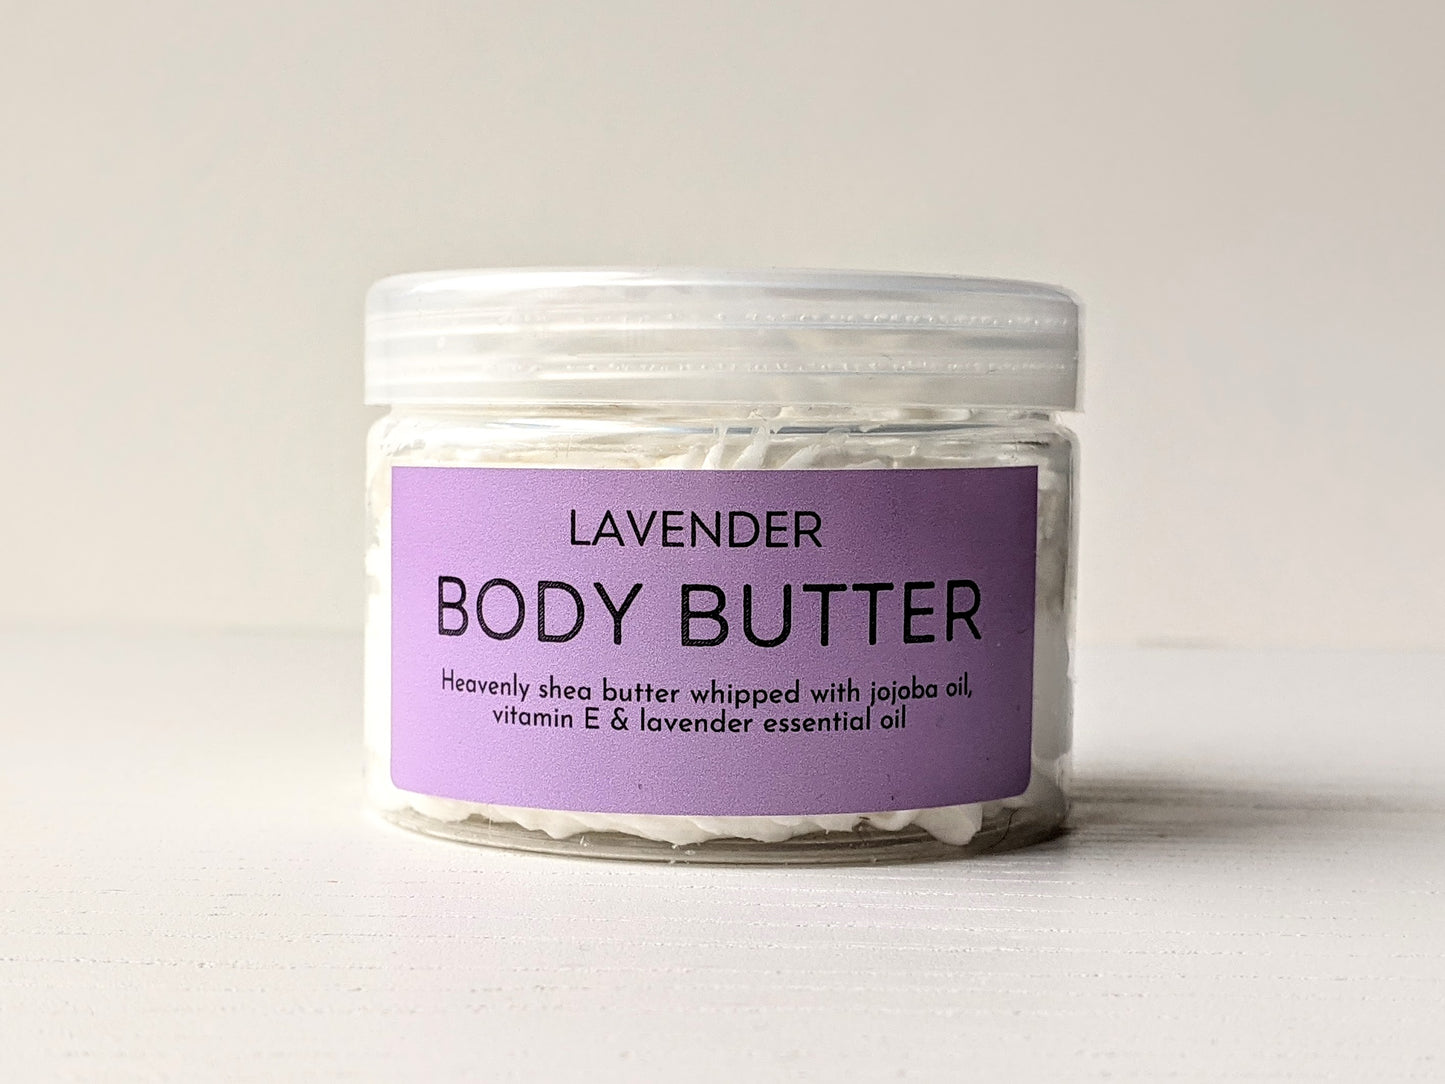 A large tub of lavender body butter